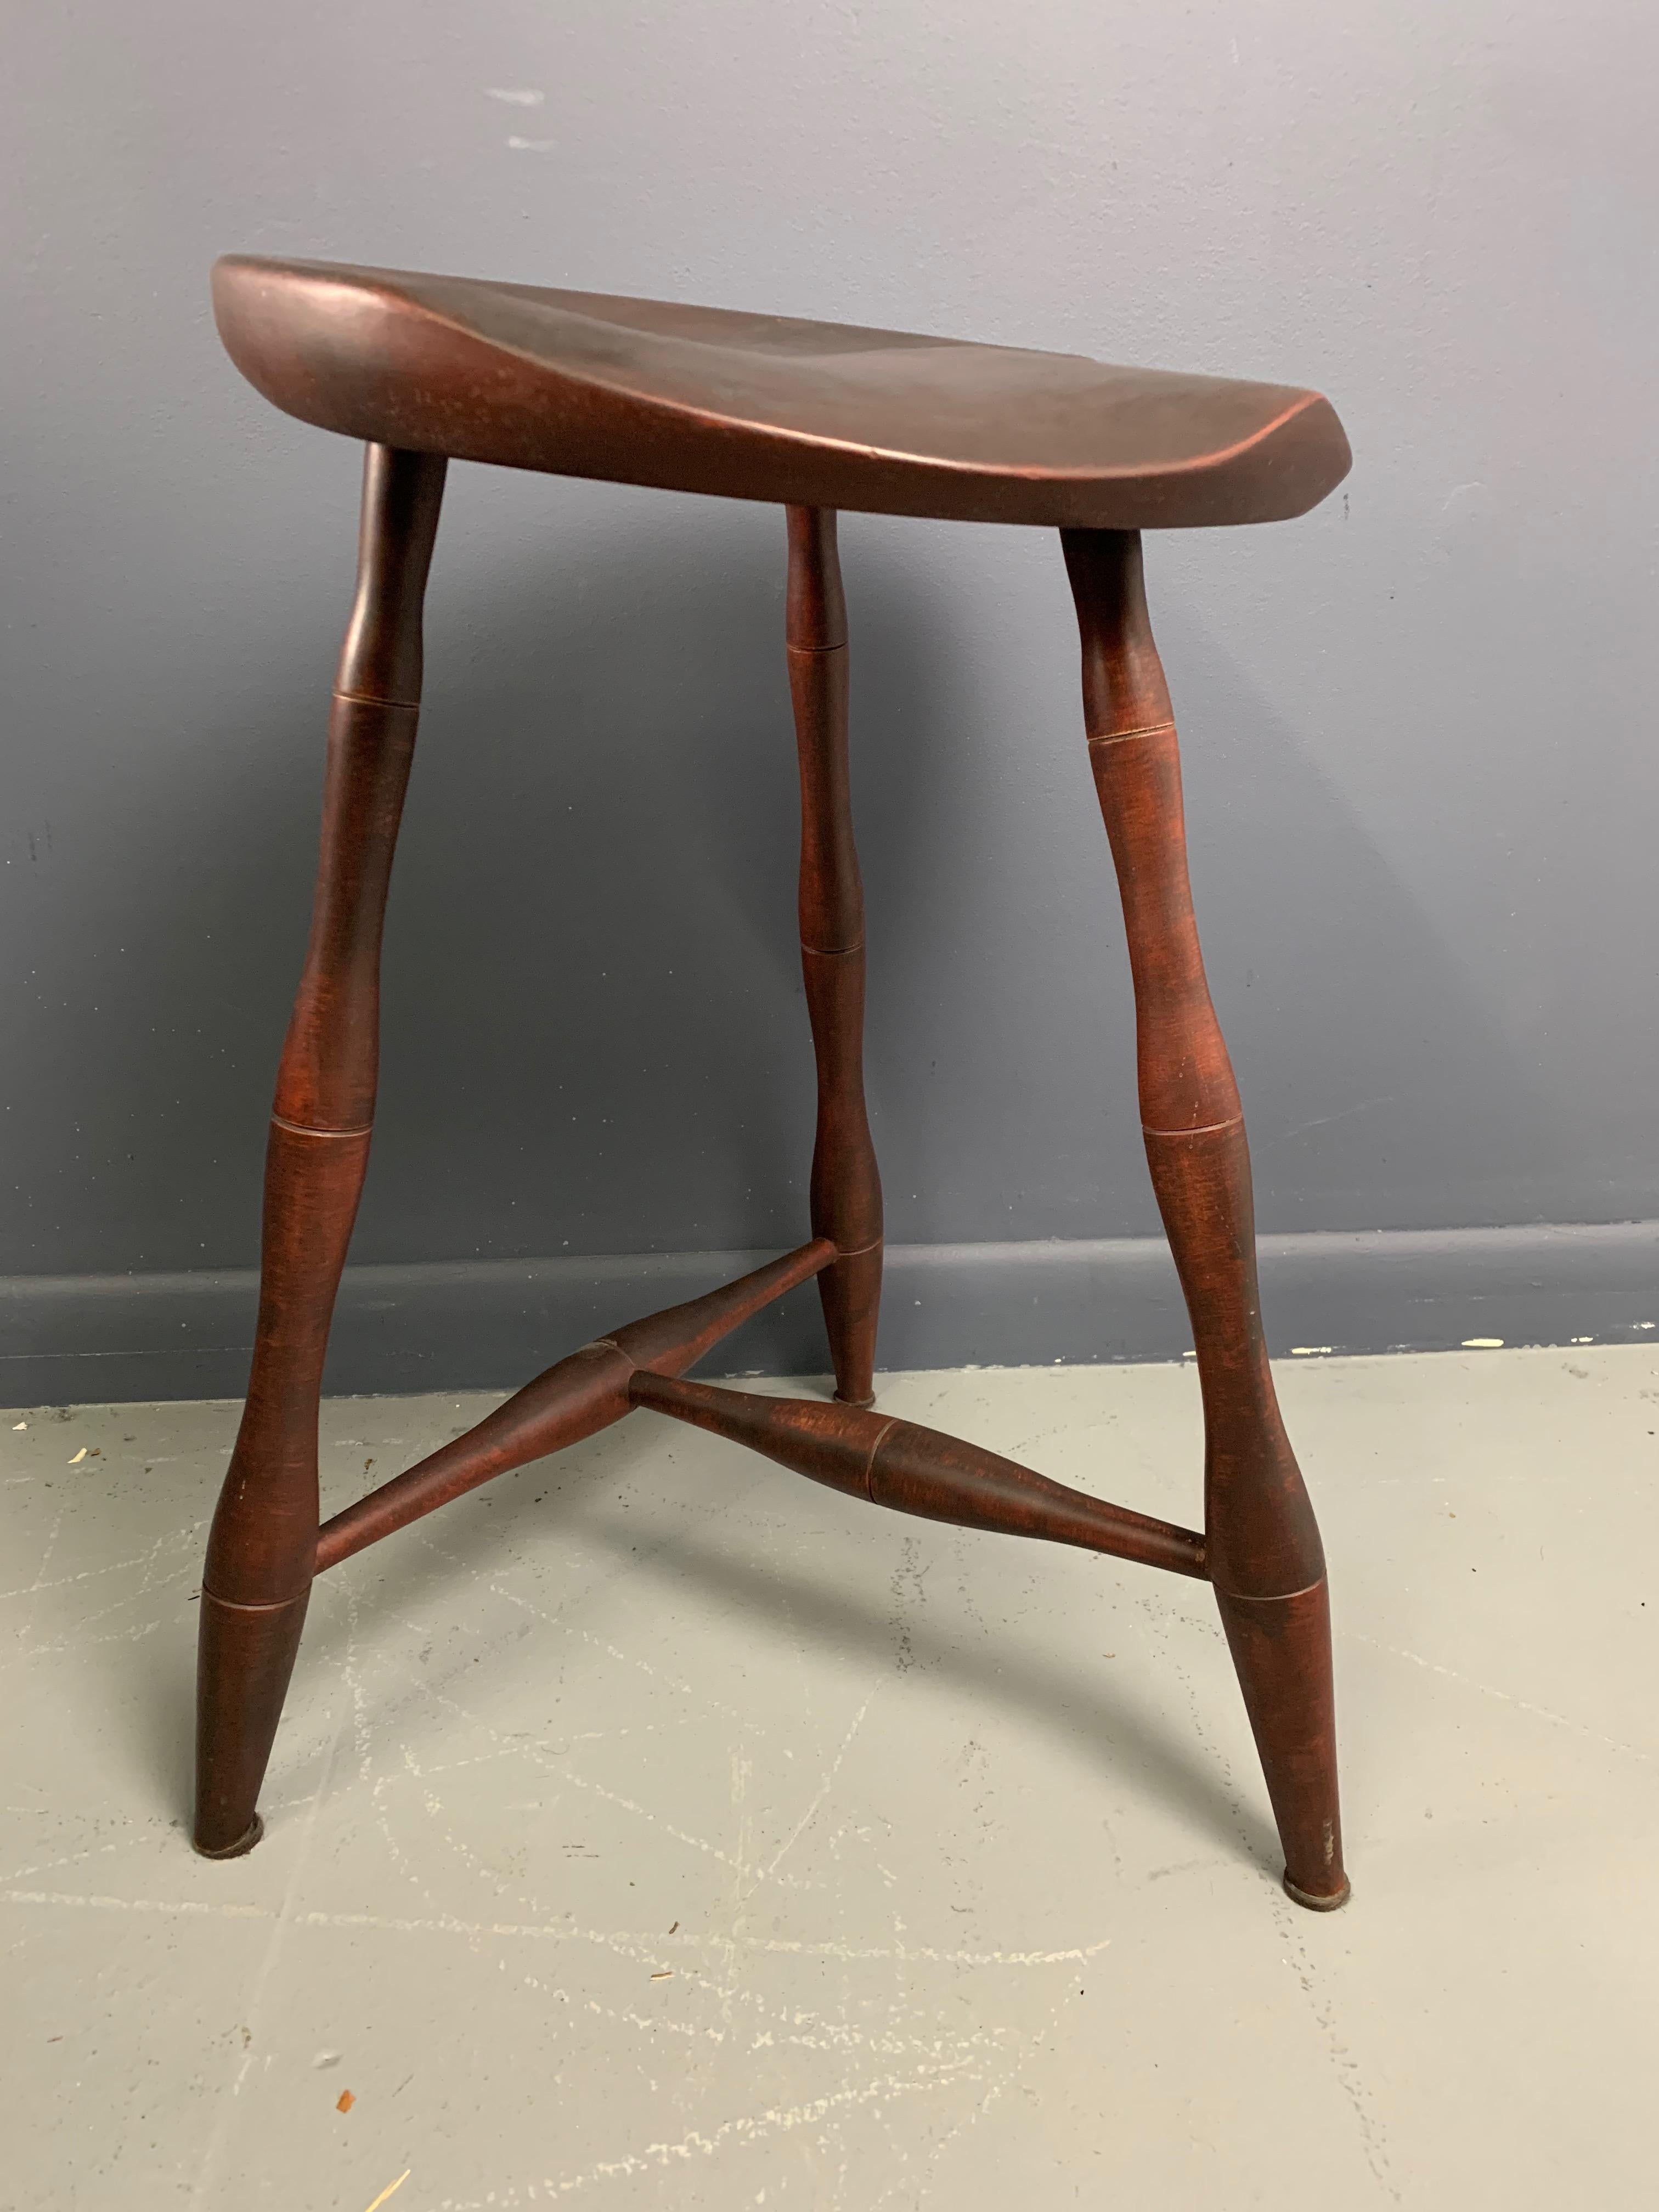 This beautifully crafted stool is a fine example of American woodworker John W Los.